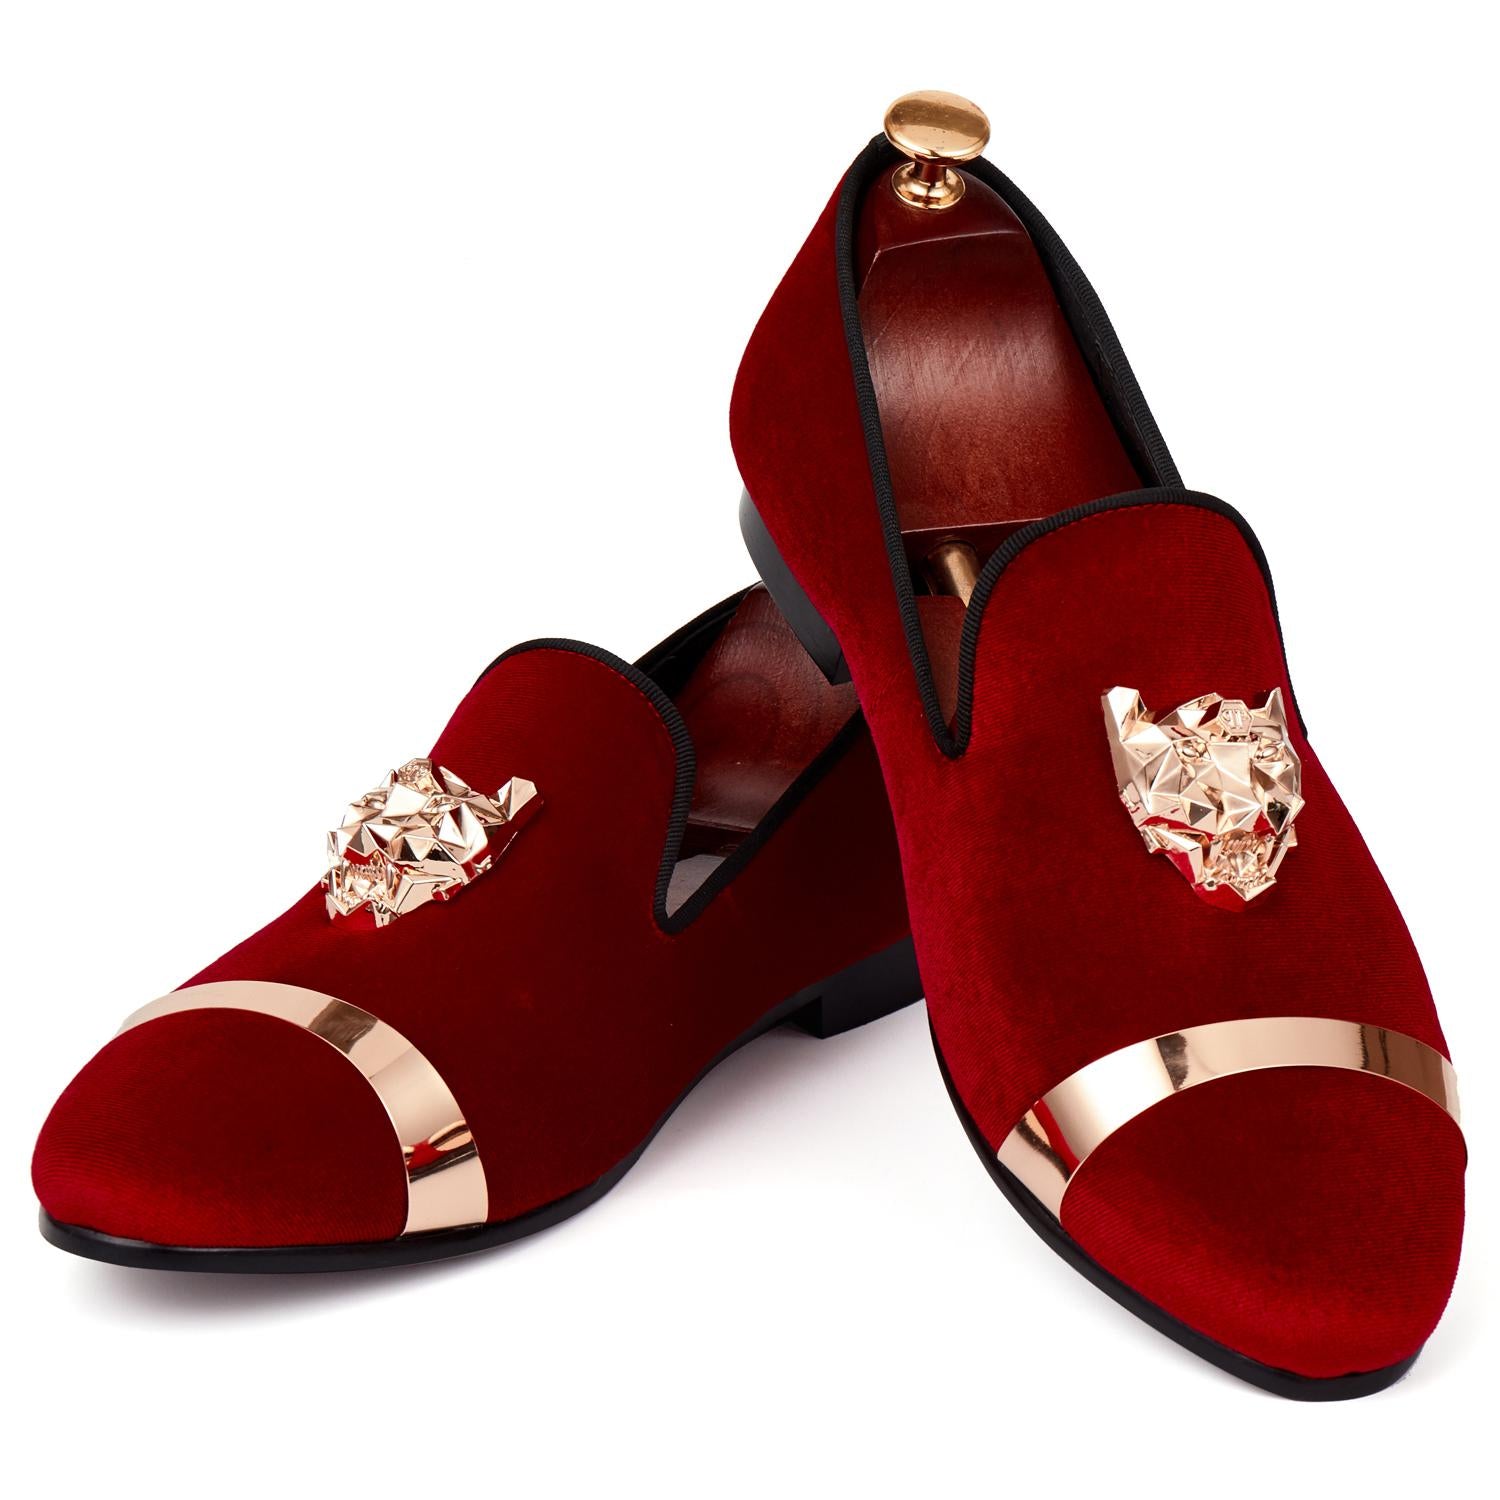 red versace dress shoes